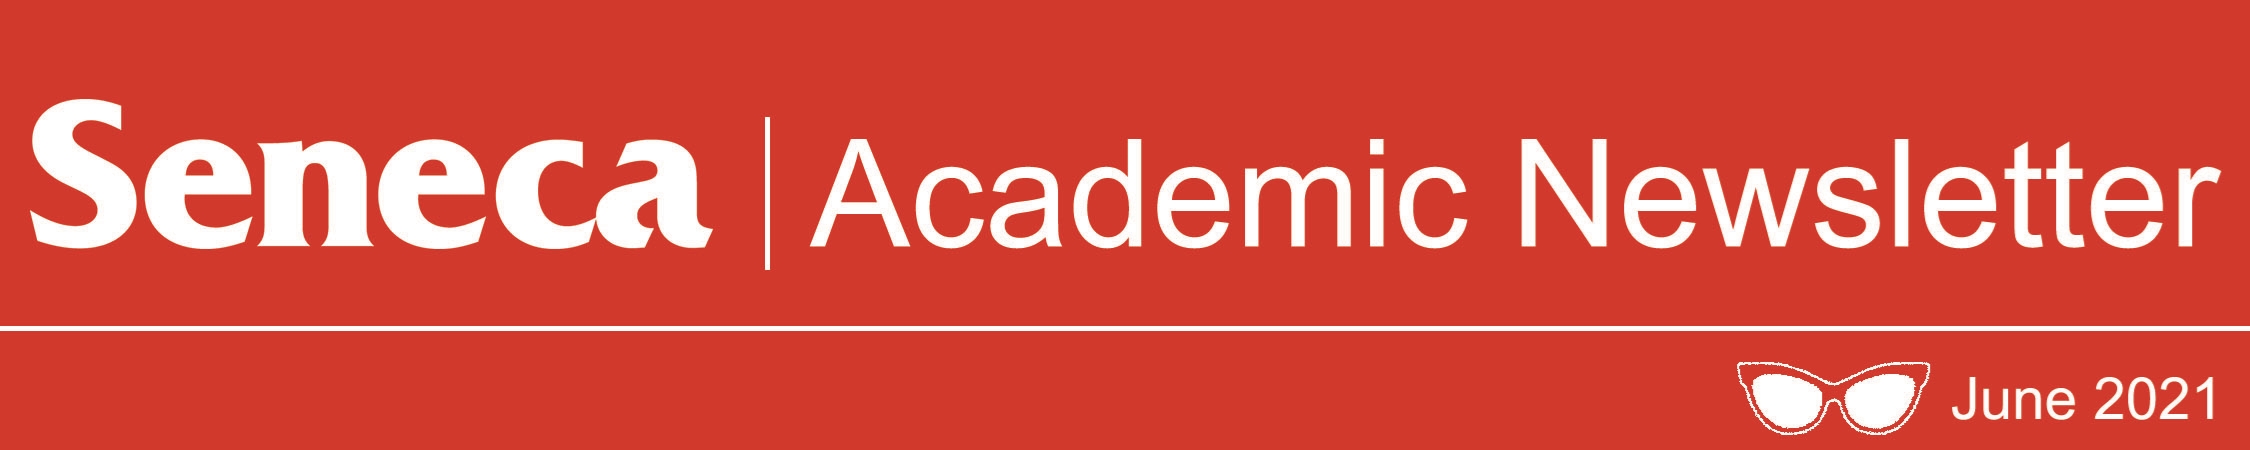 The header logo for the June 2021 issue of the Academic Newsletter